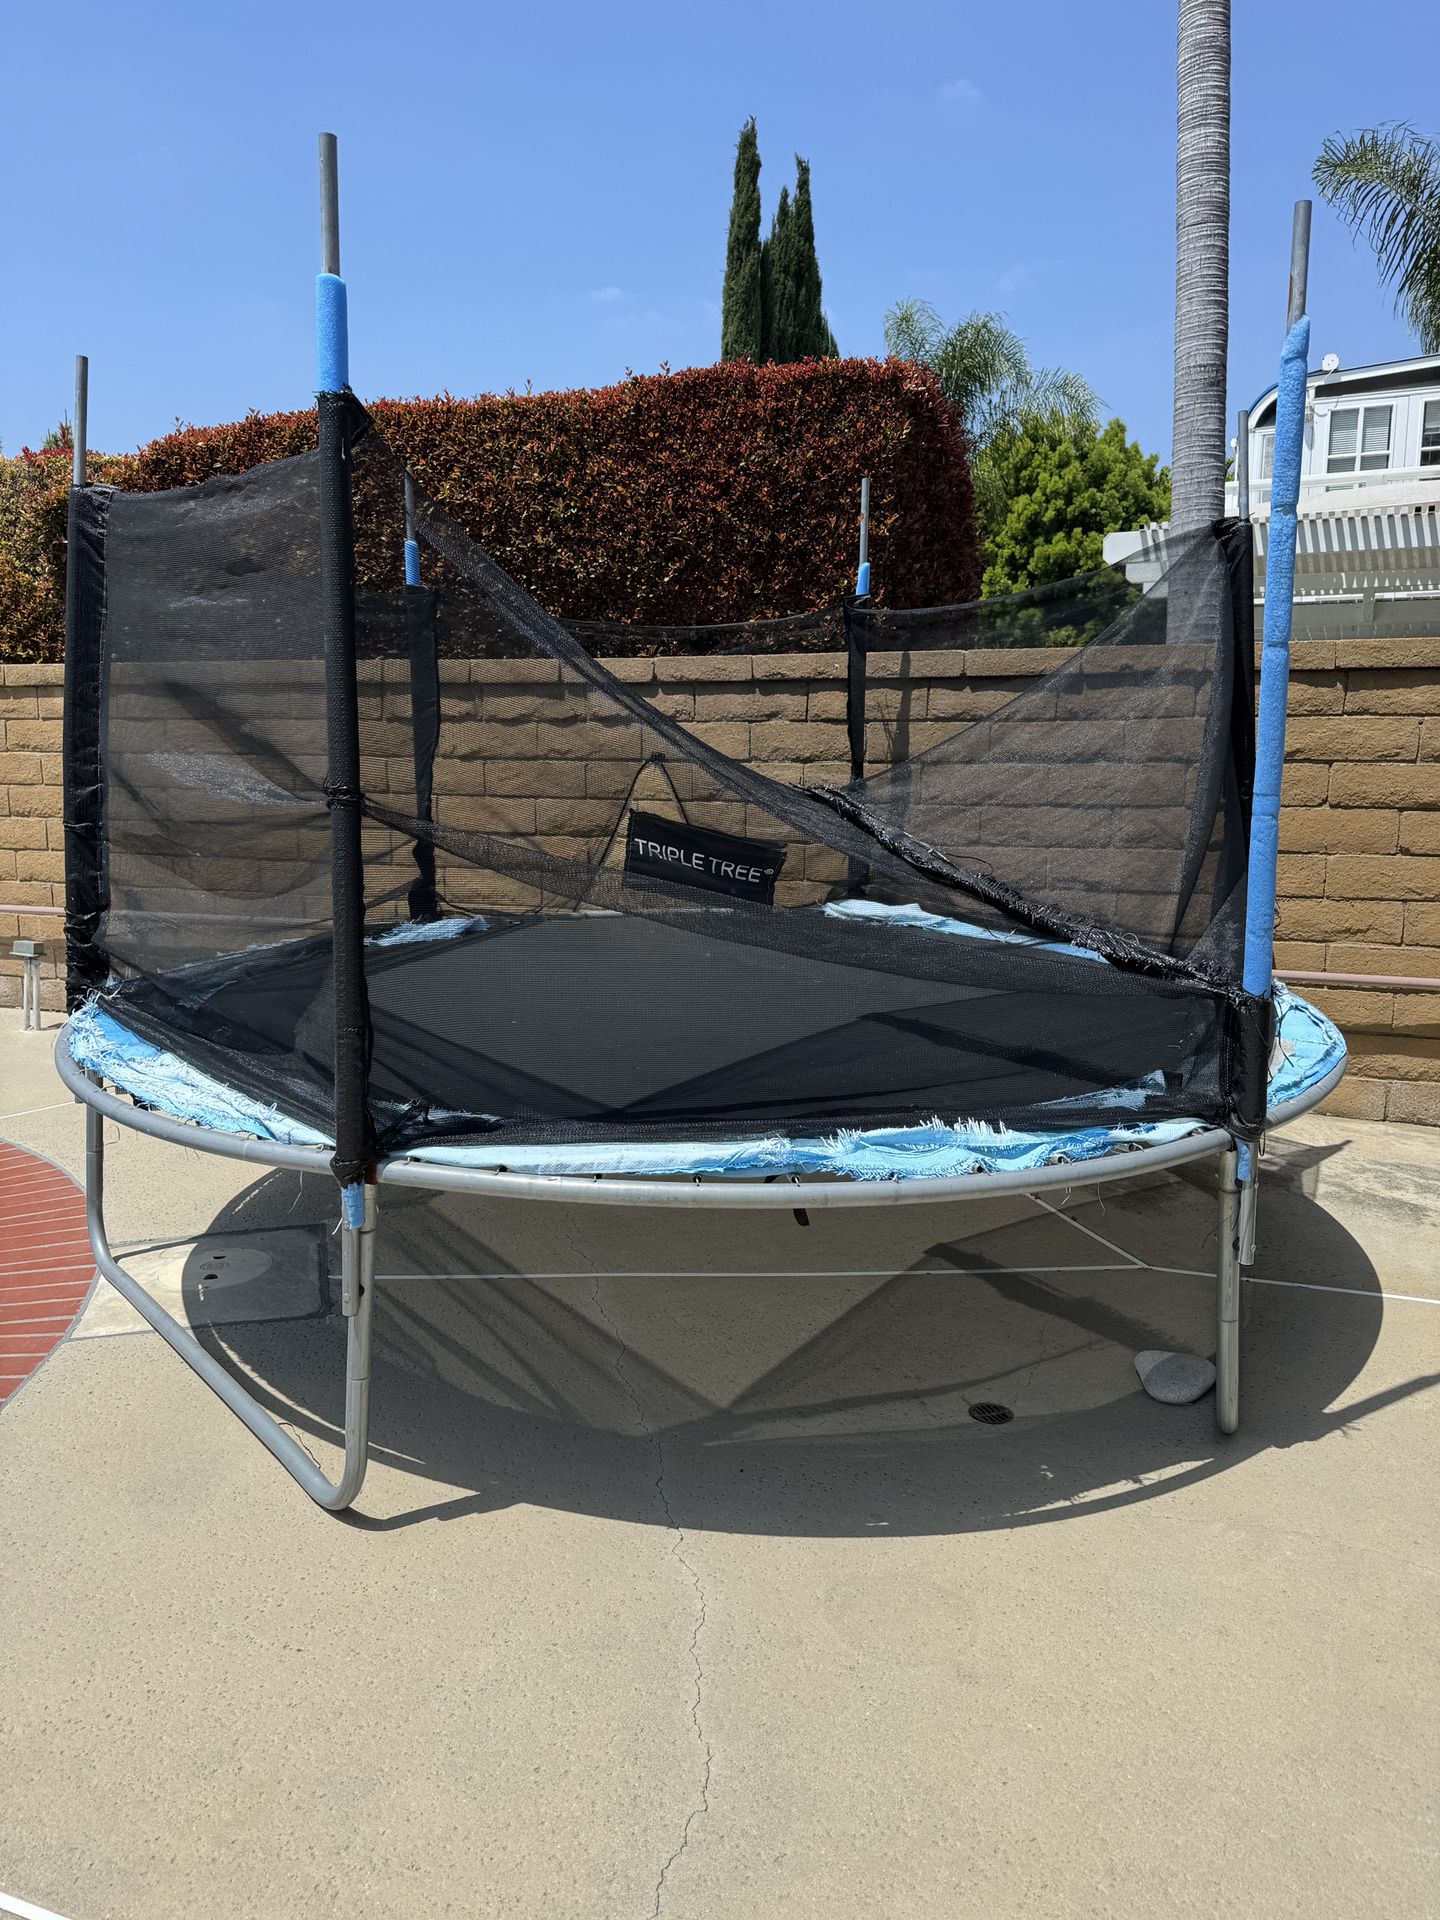 10 FT Trampoline with Safety Enclosure Net, Weight Capacity 661 LBS for 3-4 Kids,Outdoor Tramppline with Waterproof Jump Mat, Ladder,Recreational Tram